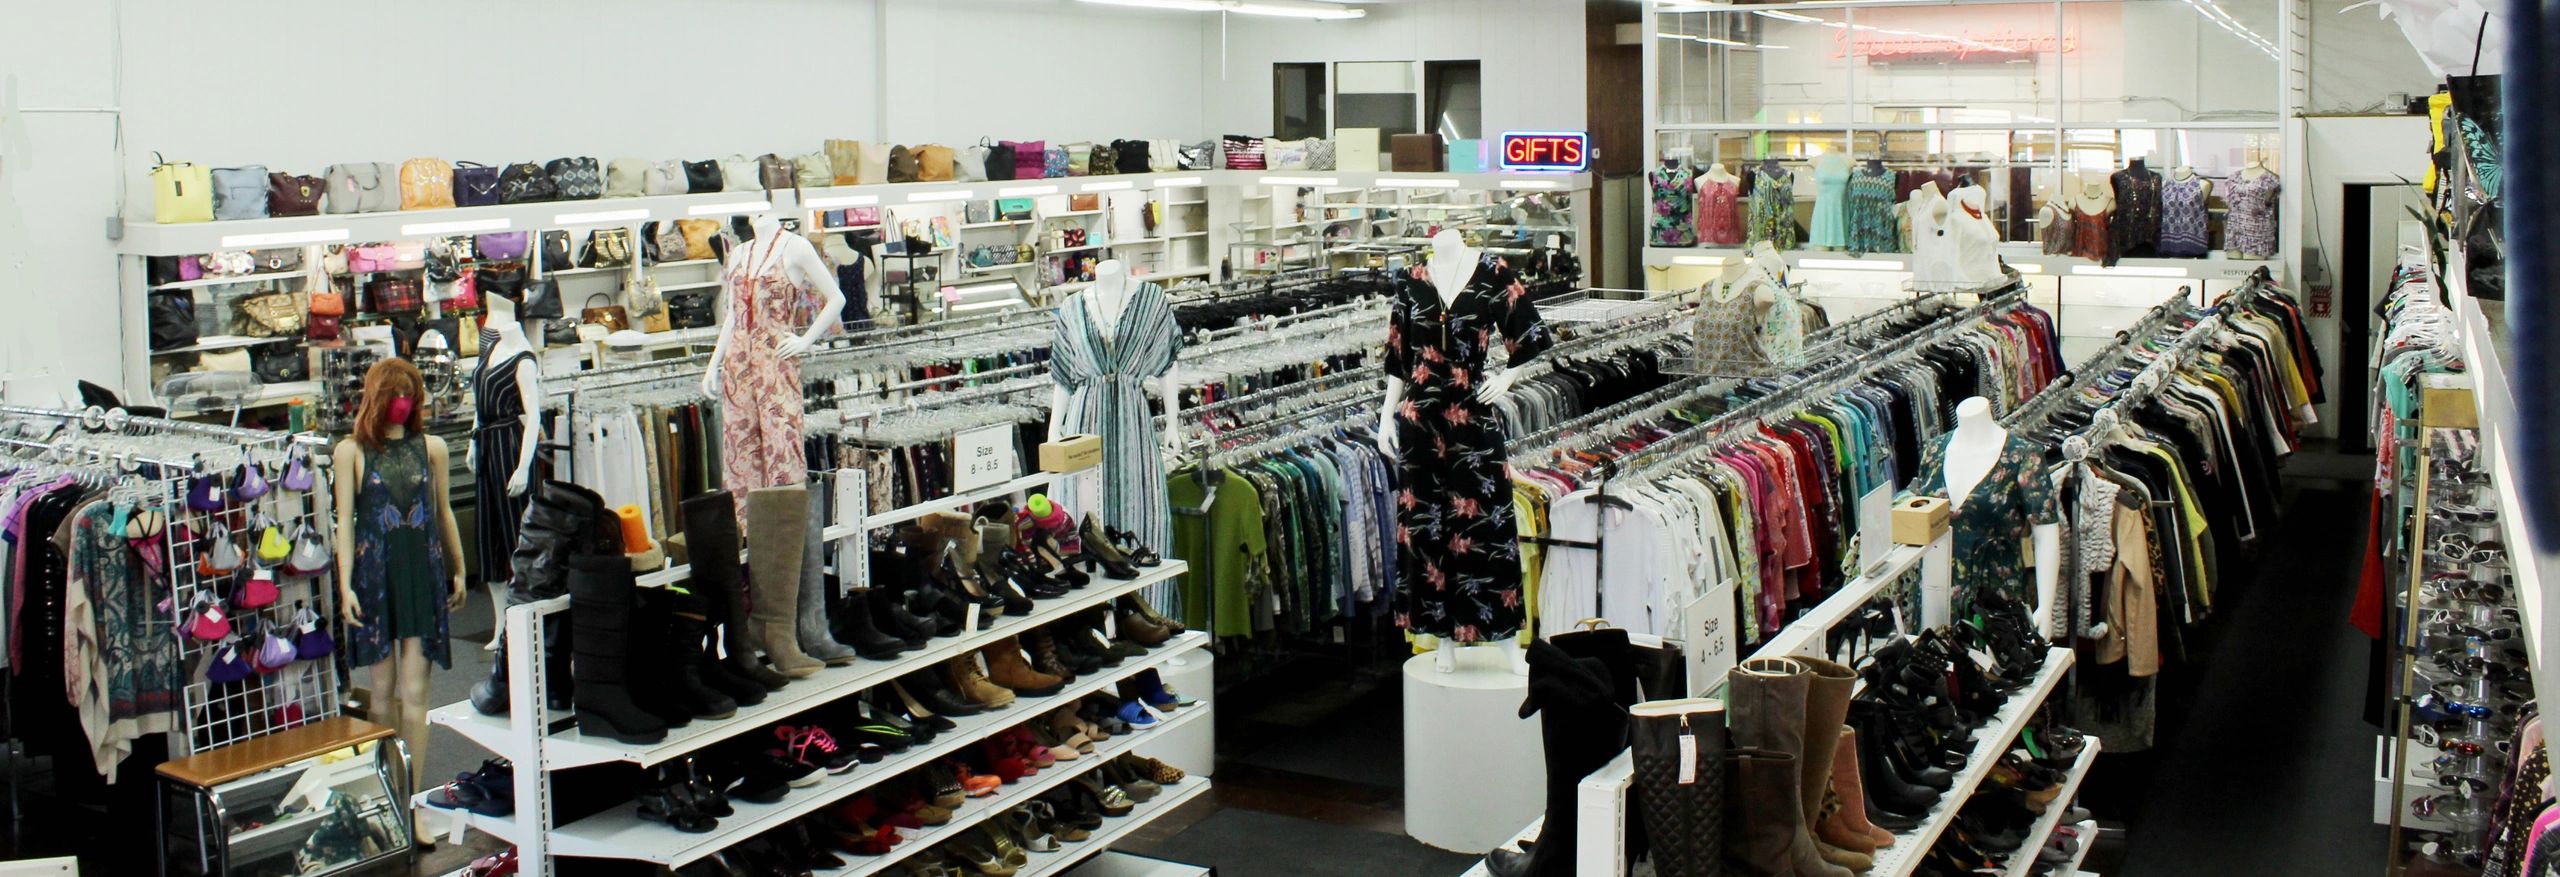 Repeat Performance - Consignment Store, Thrift, Consignment Shops